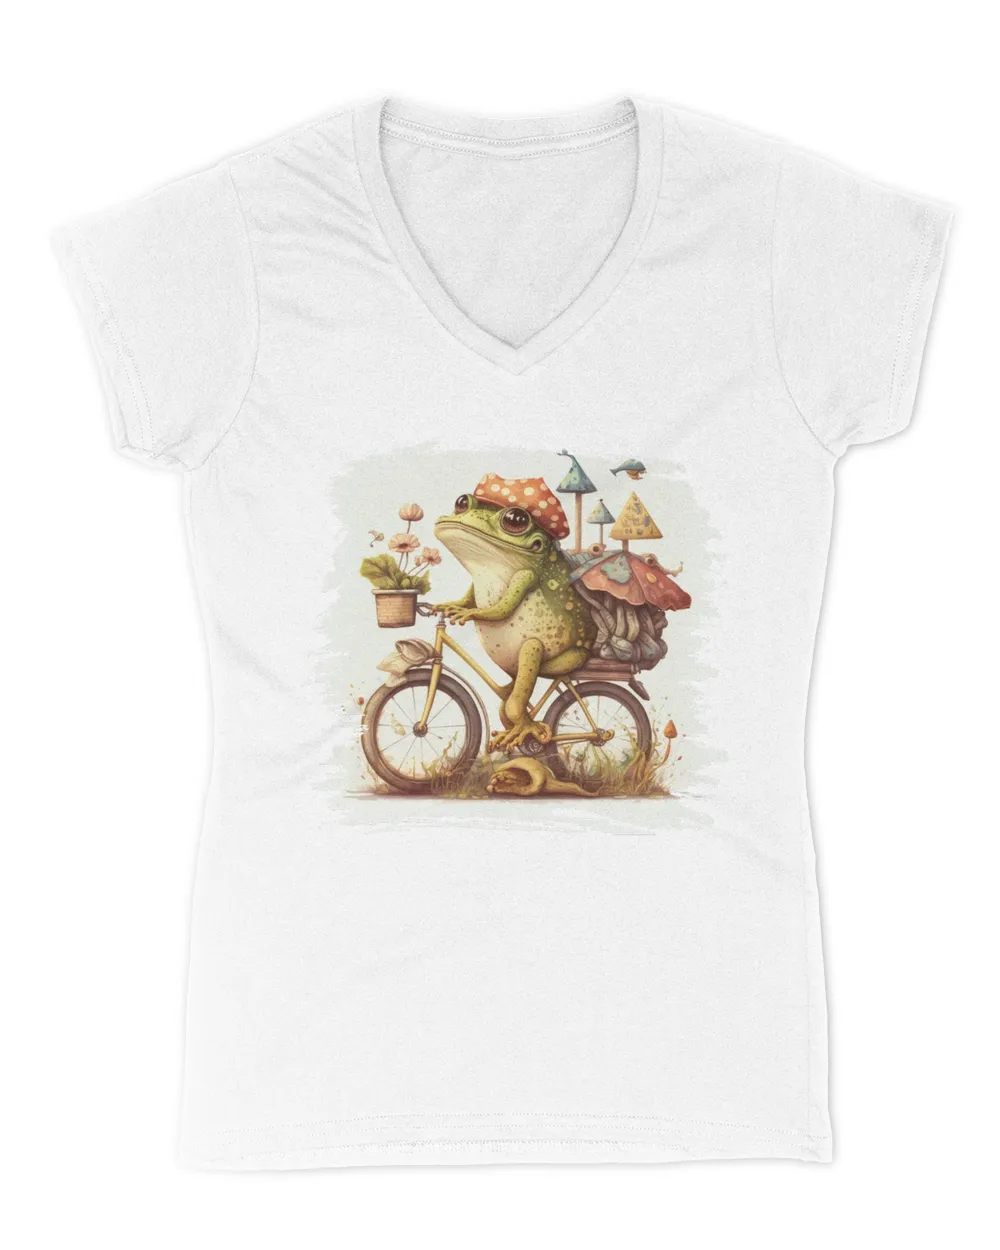 Cottagecore Shirt Aesthetic Frog ride a bicycle, bike Log T-Shirt Women's Graphic Print Bella Aesthetic Top